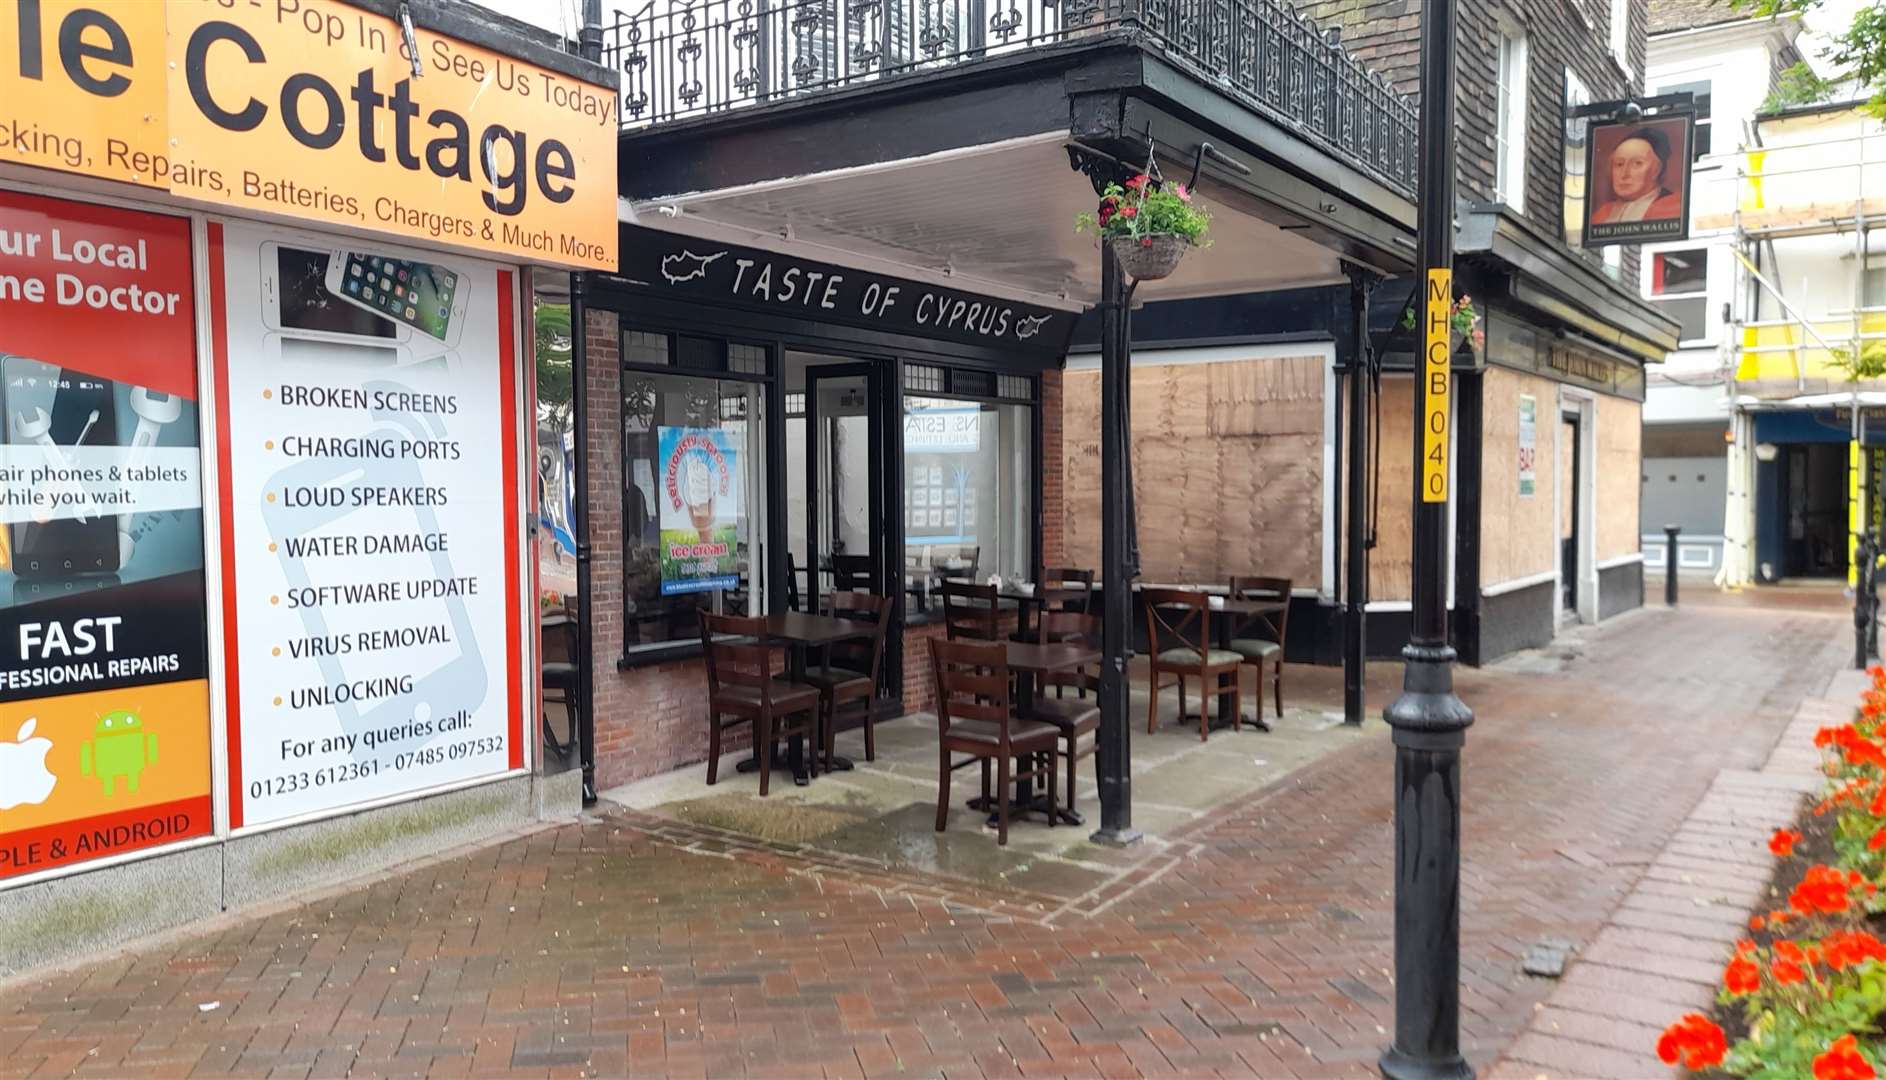 Taste of Cyprus hopes to bring a touch of the Mediterranean to Ashford's high street